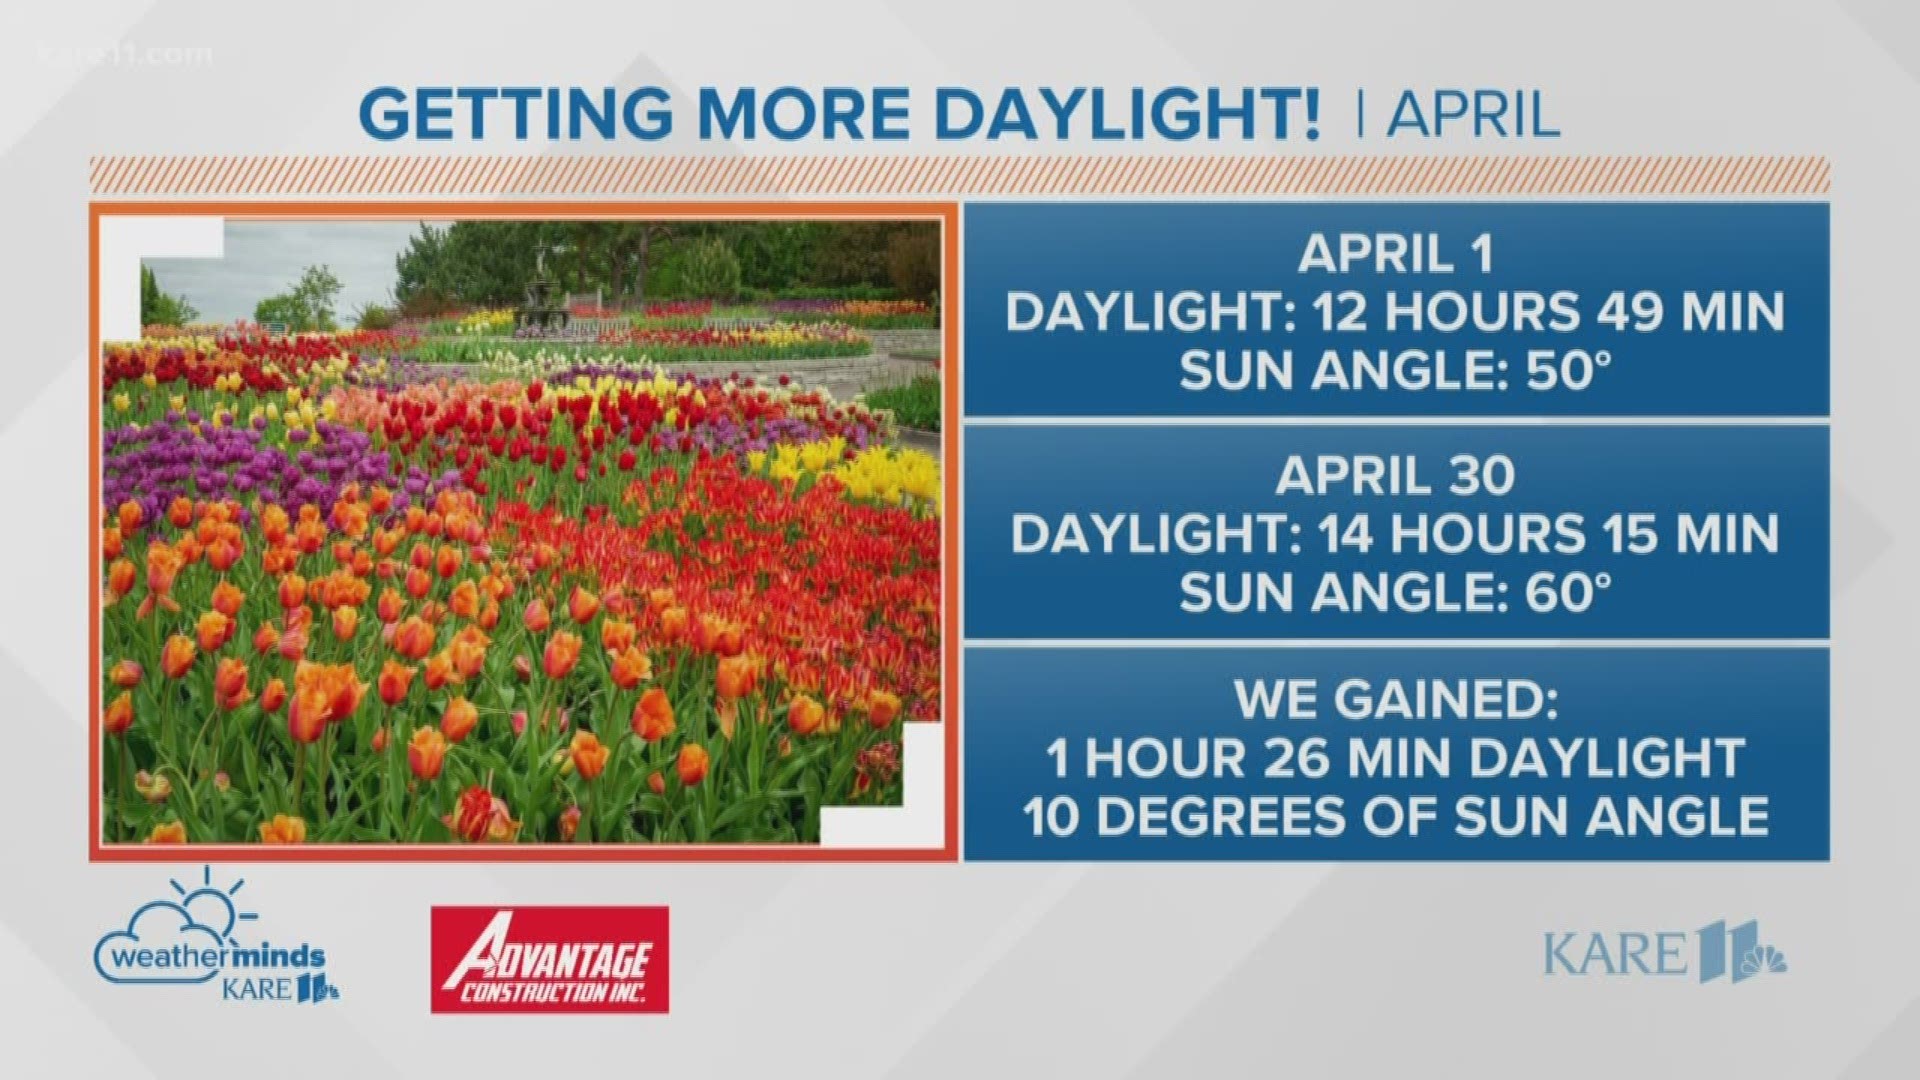 Over the 30 days in April, we gain more than an hour of sunshine.